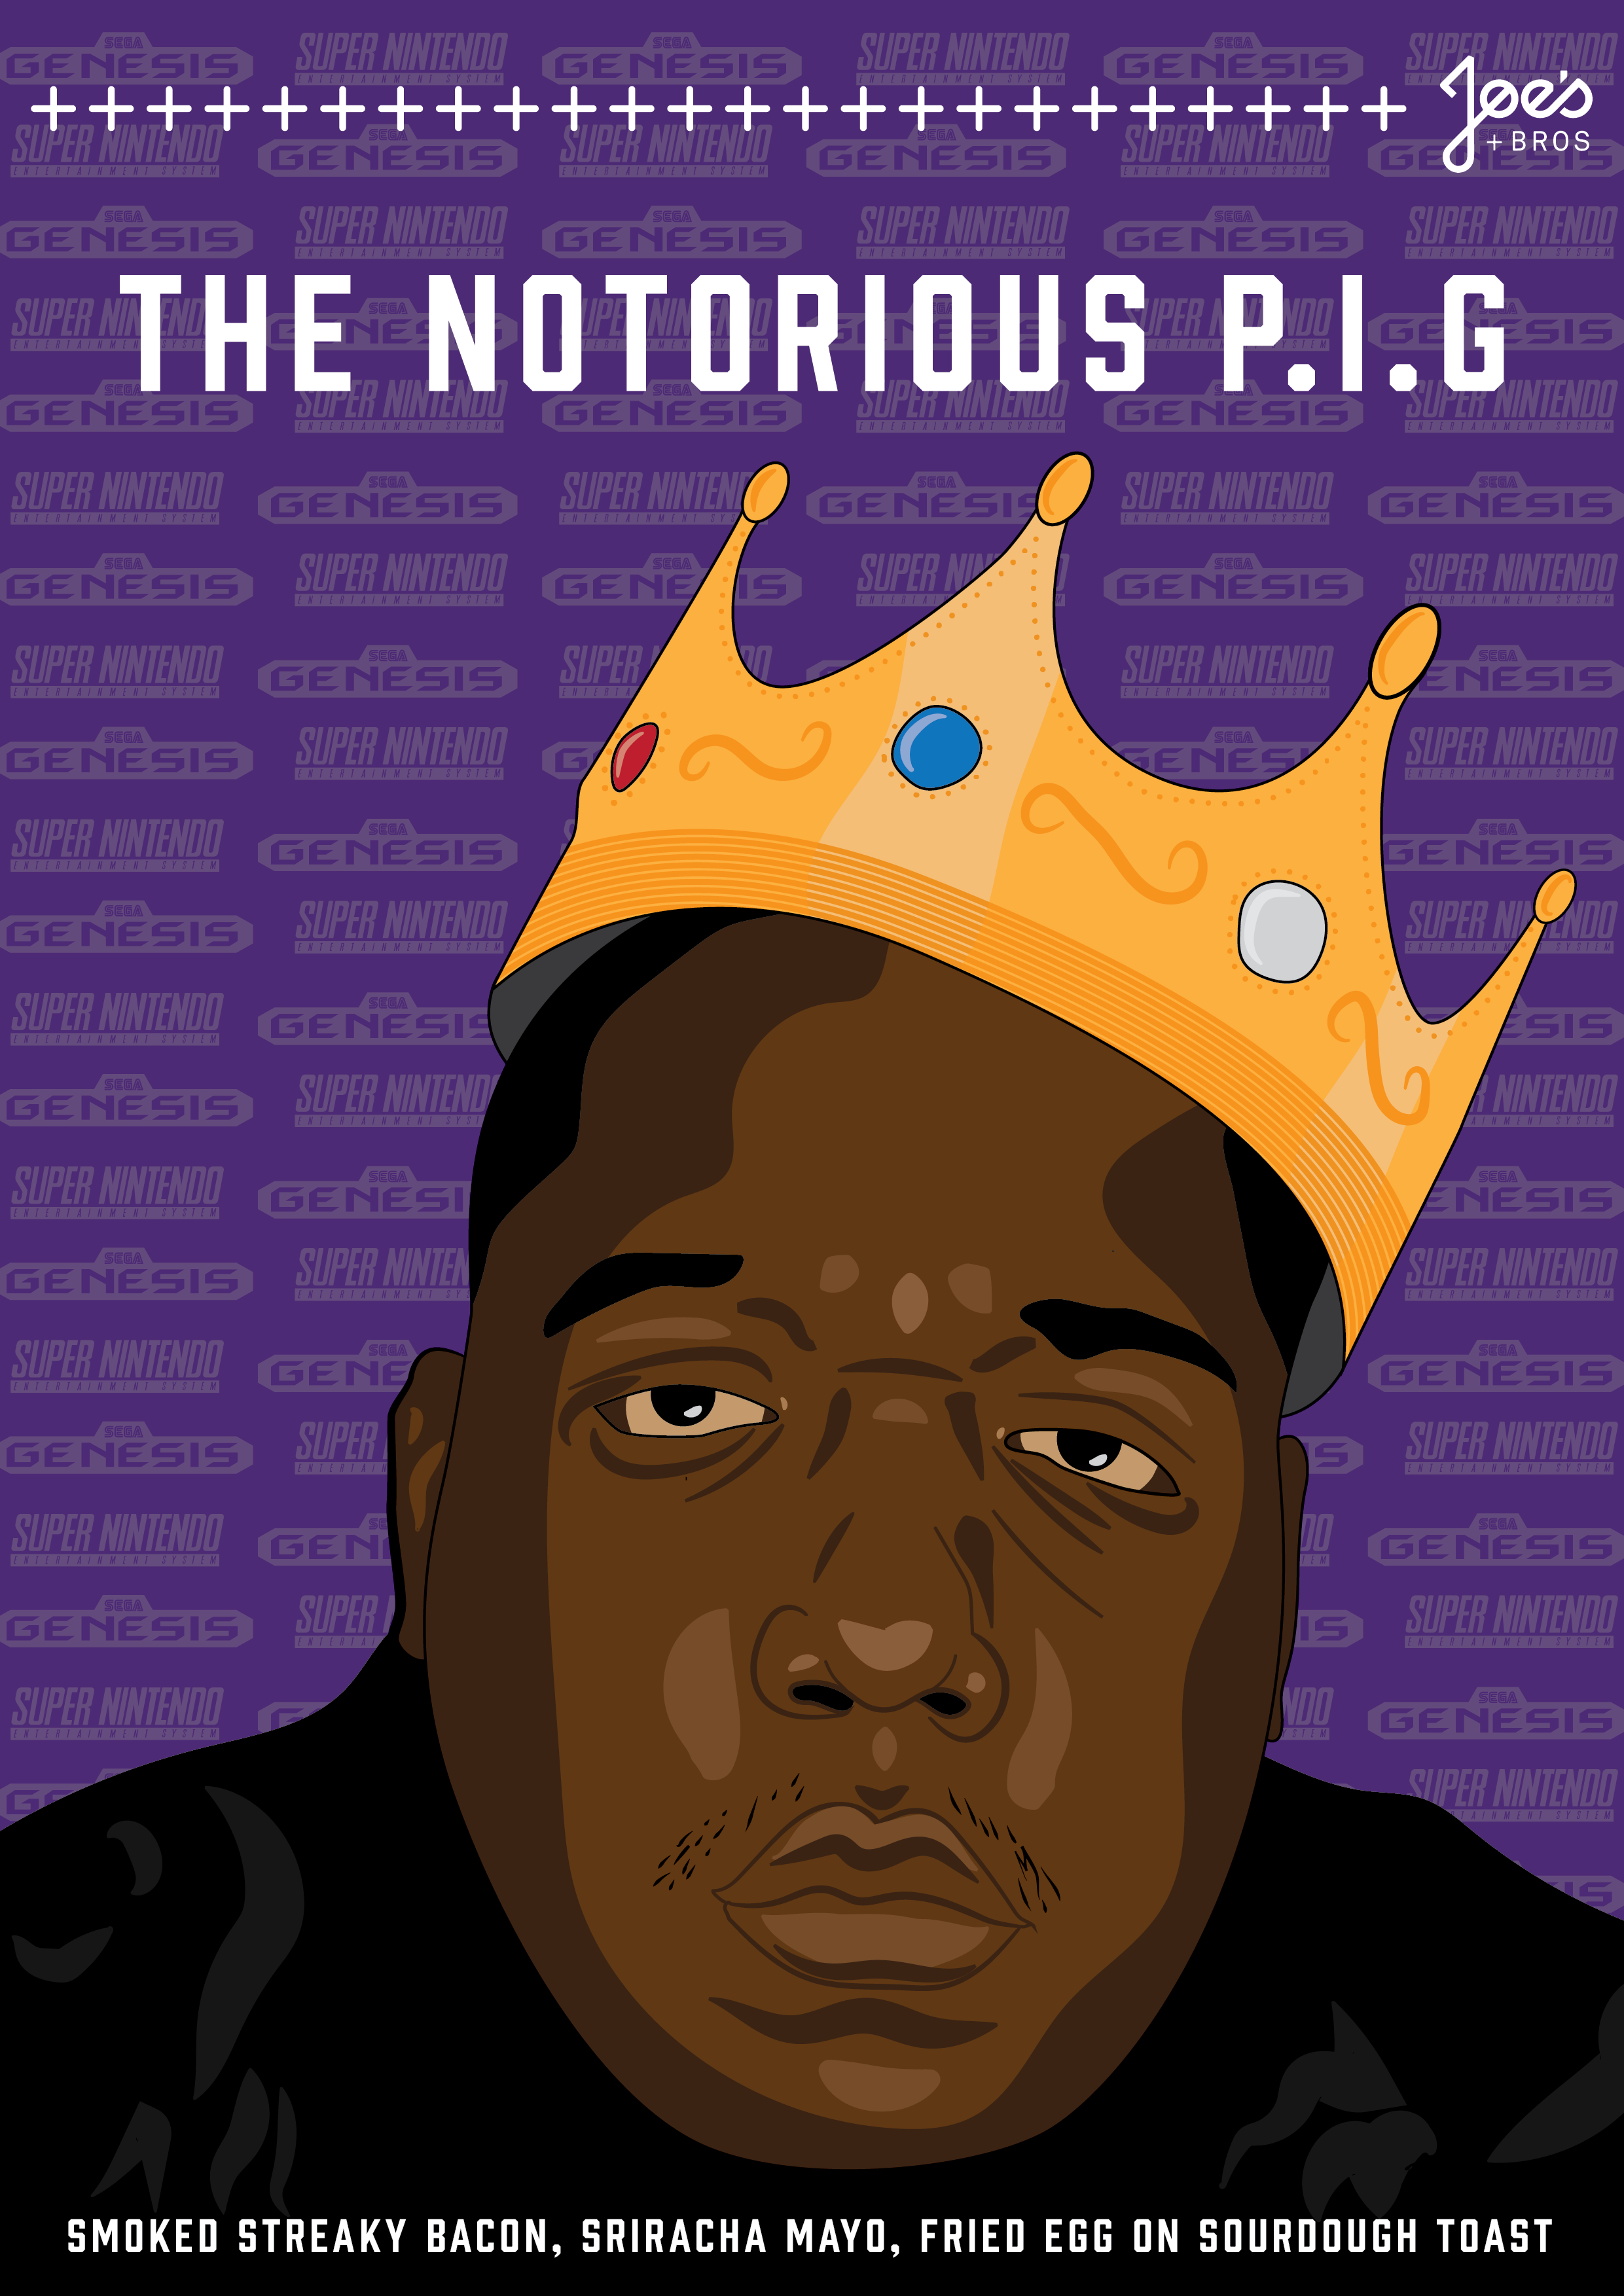 Joes&Bros Notorious PIG A4 v03-02.png